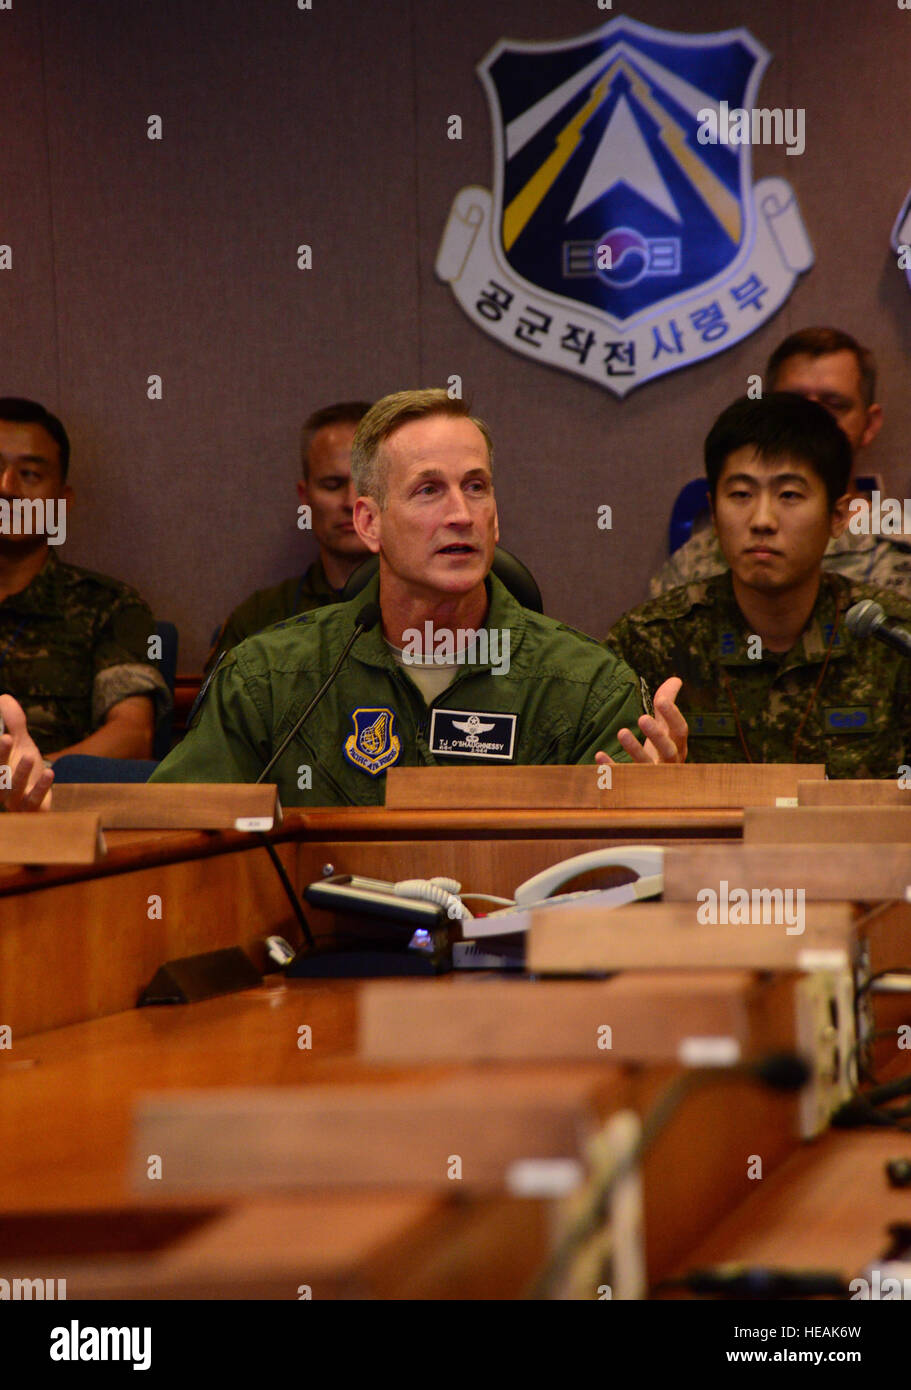 Lt. Gen. Terrence O’Shaughnessy speaks to senior leaders from the U.S. and Republic of Korea Air Forces during the Air Boss Conference on Osan Air Base, RoK, July 17, 2015. The annual conference, hosted by the Air Component Command commander, is a bi-lateral forum between U.S. and RoK forces under the combined forces aegis on the peninsula. The conference plays a vital role in bringing together commanders from both on and off the peninsula. Each of the commanders could send forces to support a potential crisis or conflict in the RoK. O’Shaughnessy is the deputy commander, United Nations Comman Stock Photo